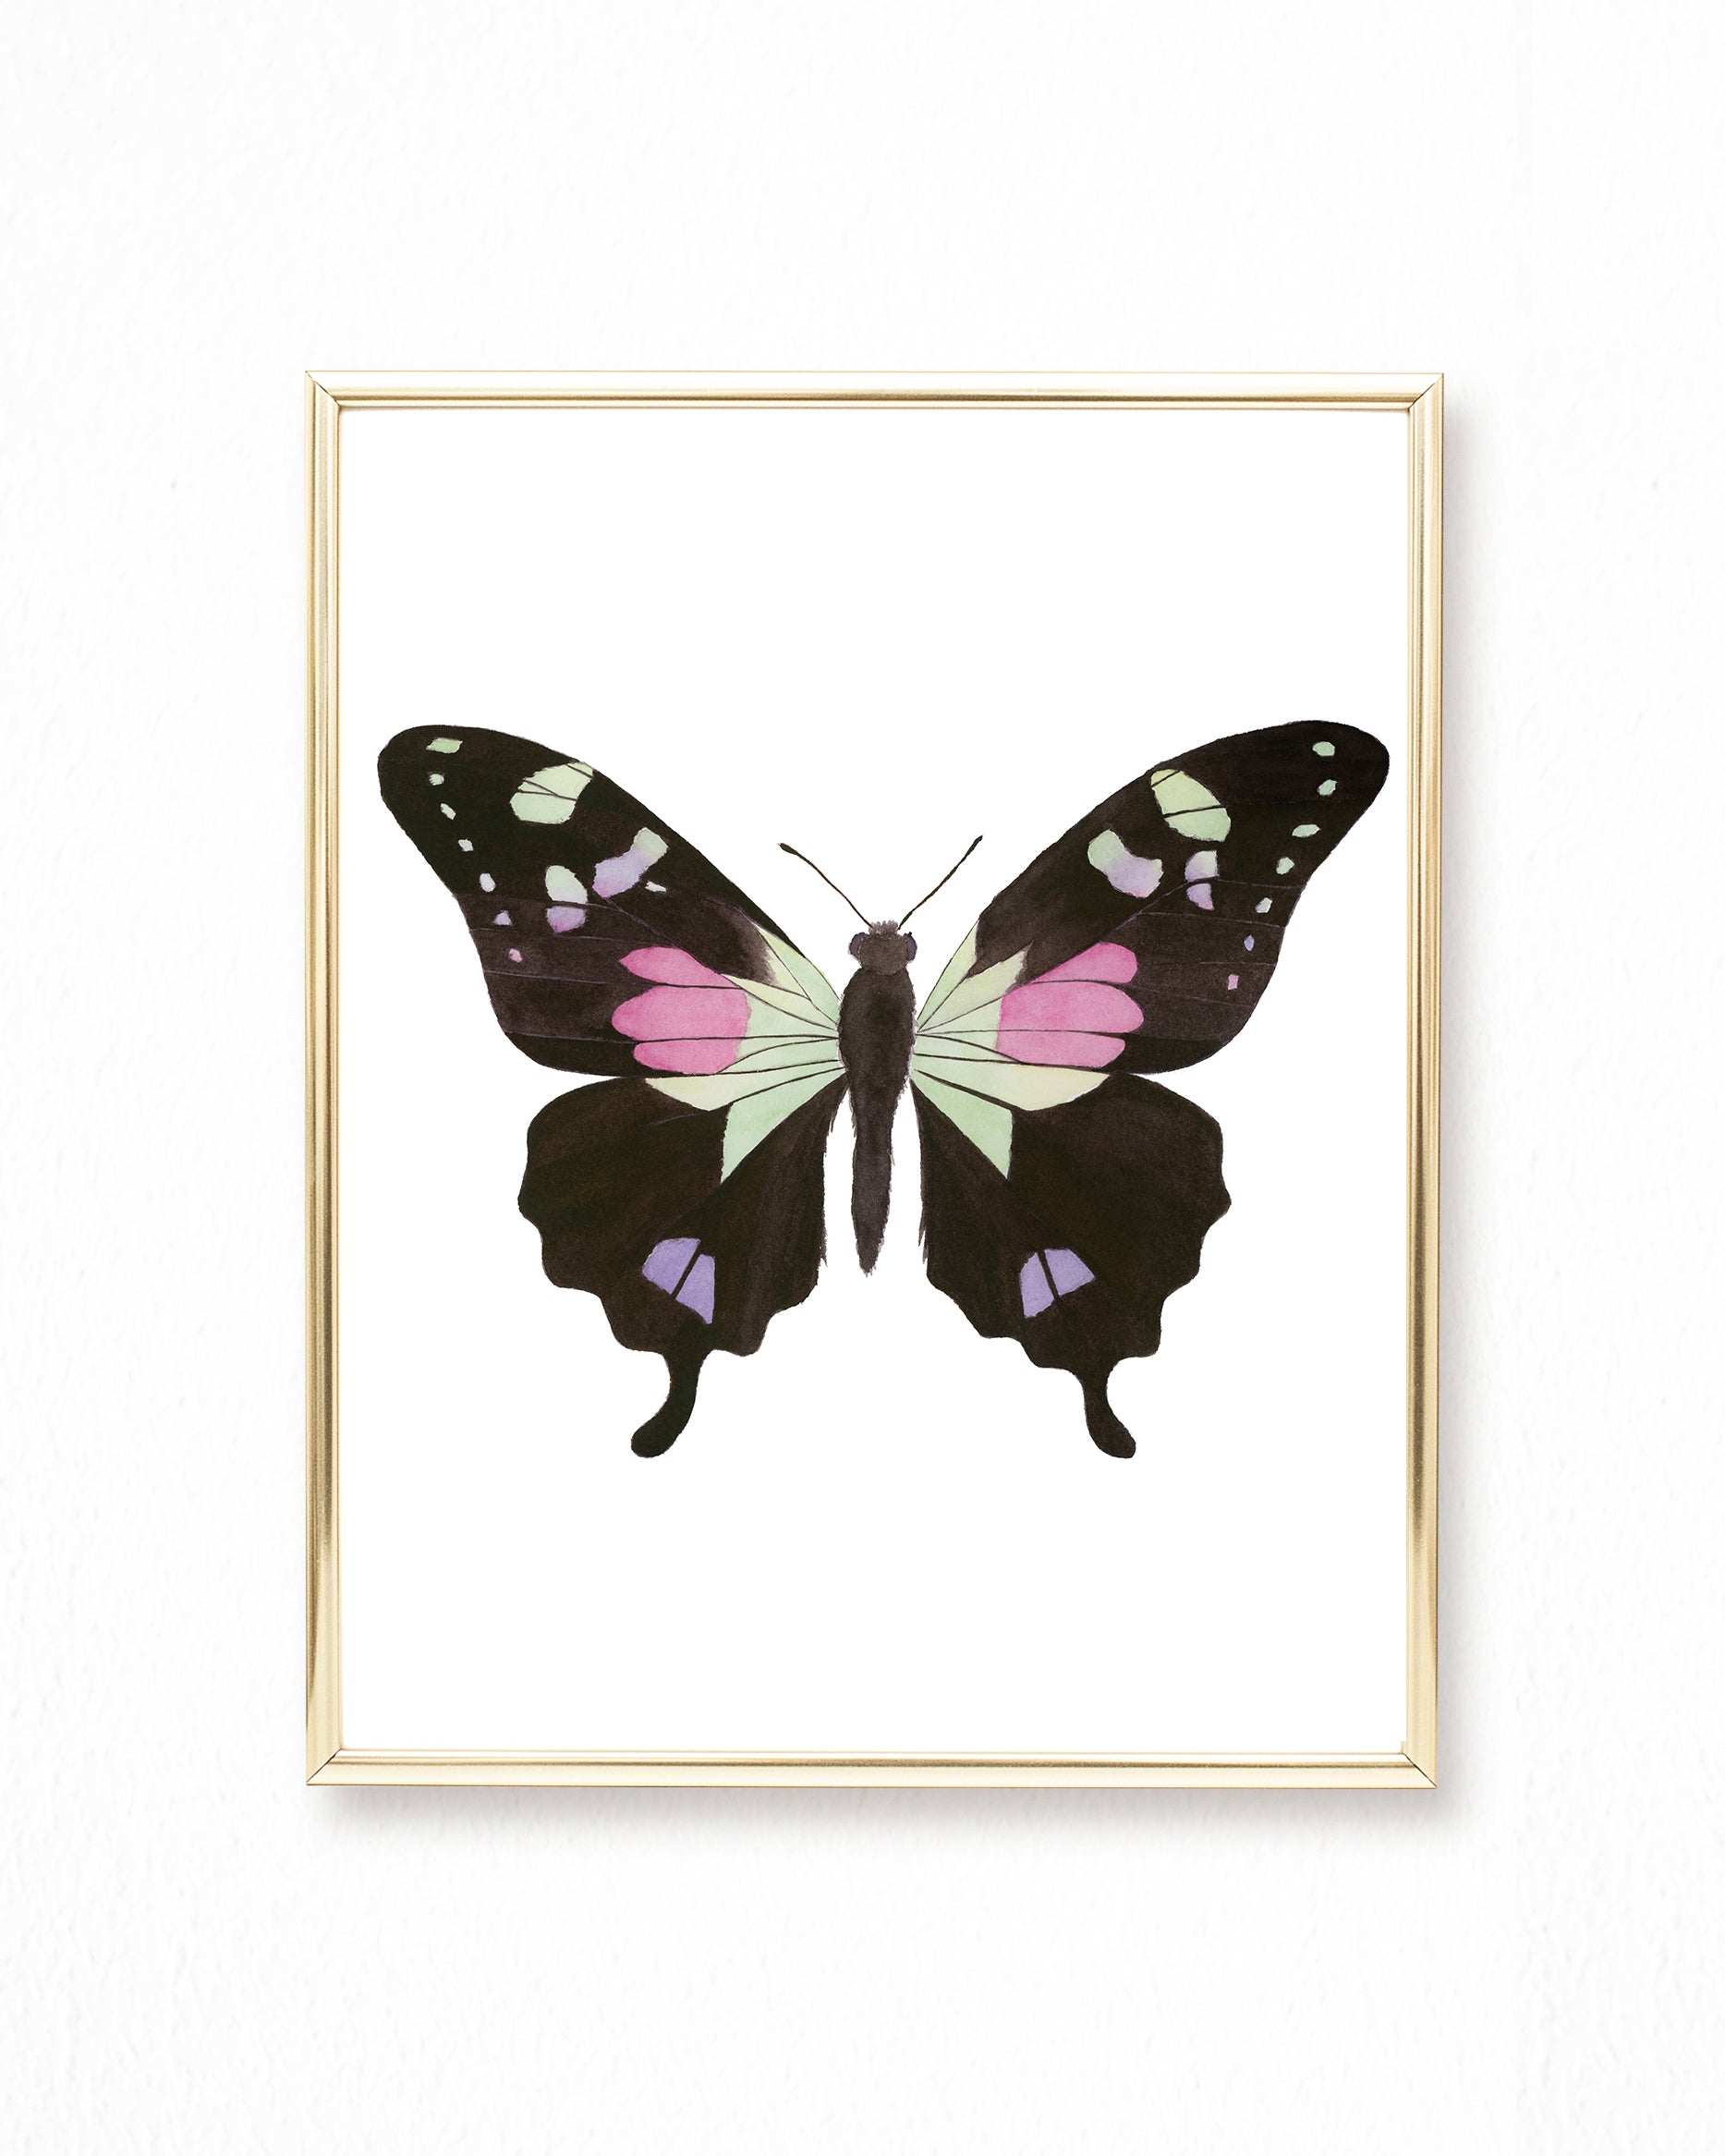 Watercolor Butterfly Paintings - Collection of 9 Art Prints